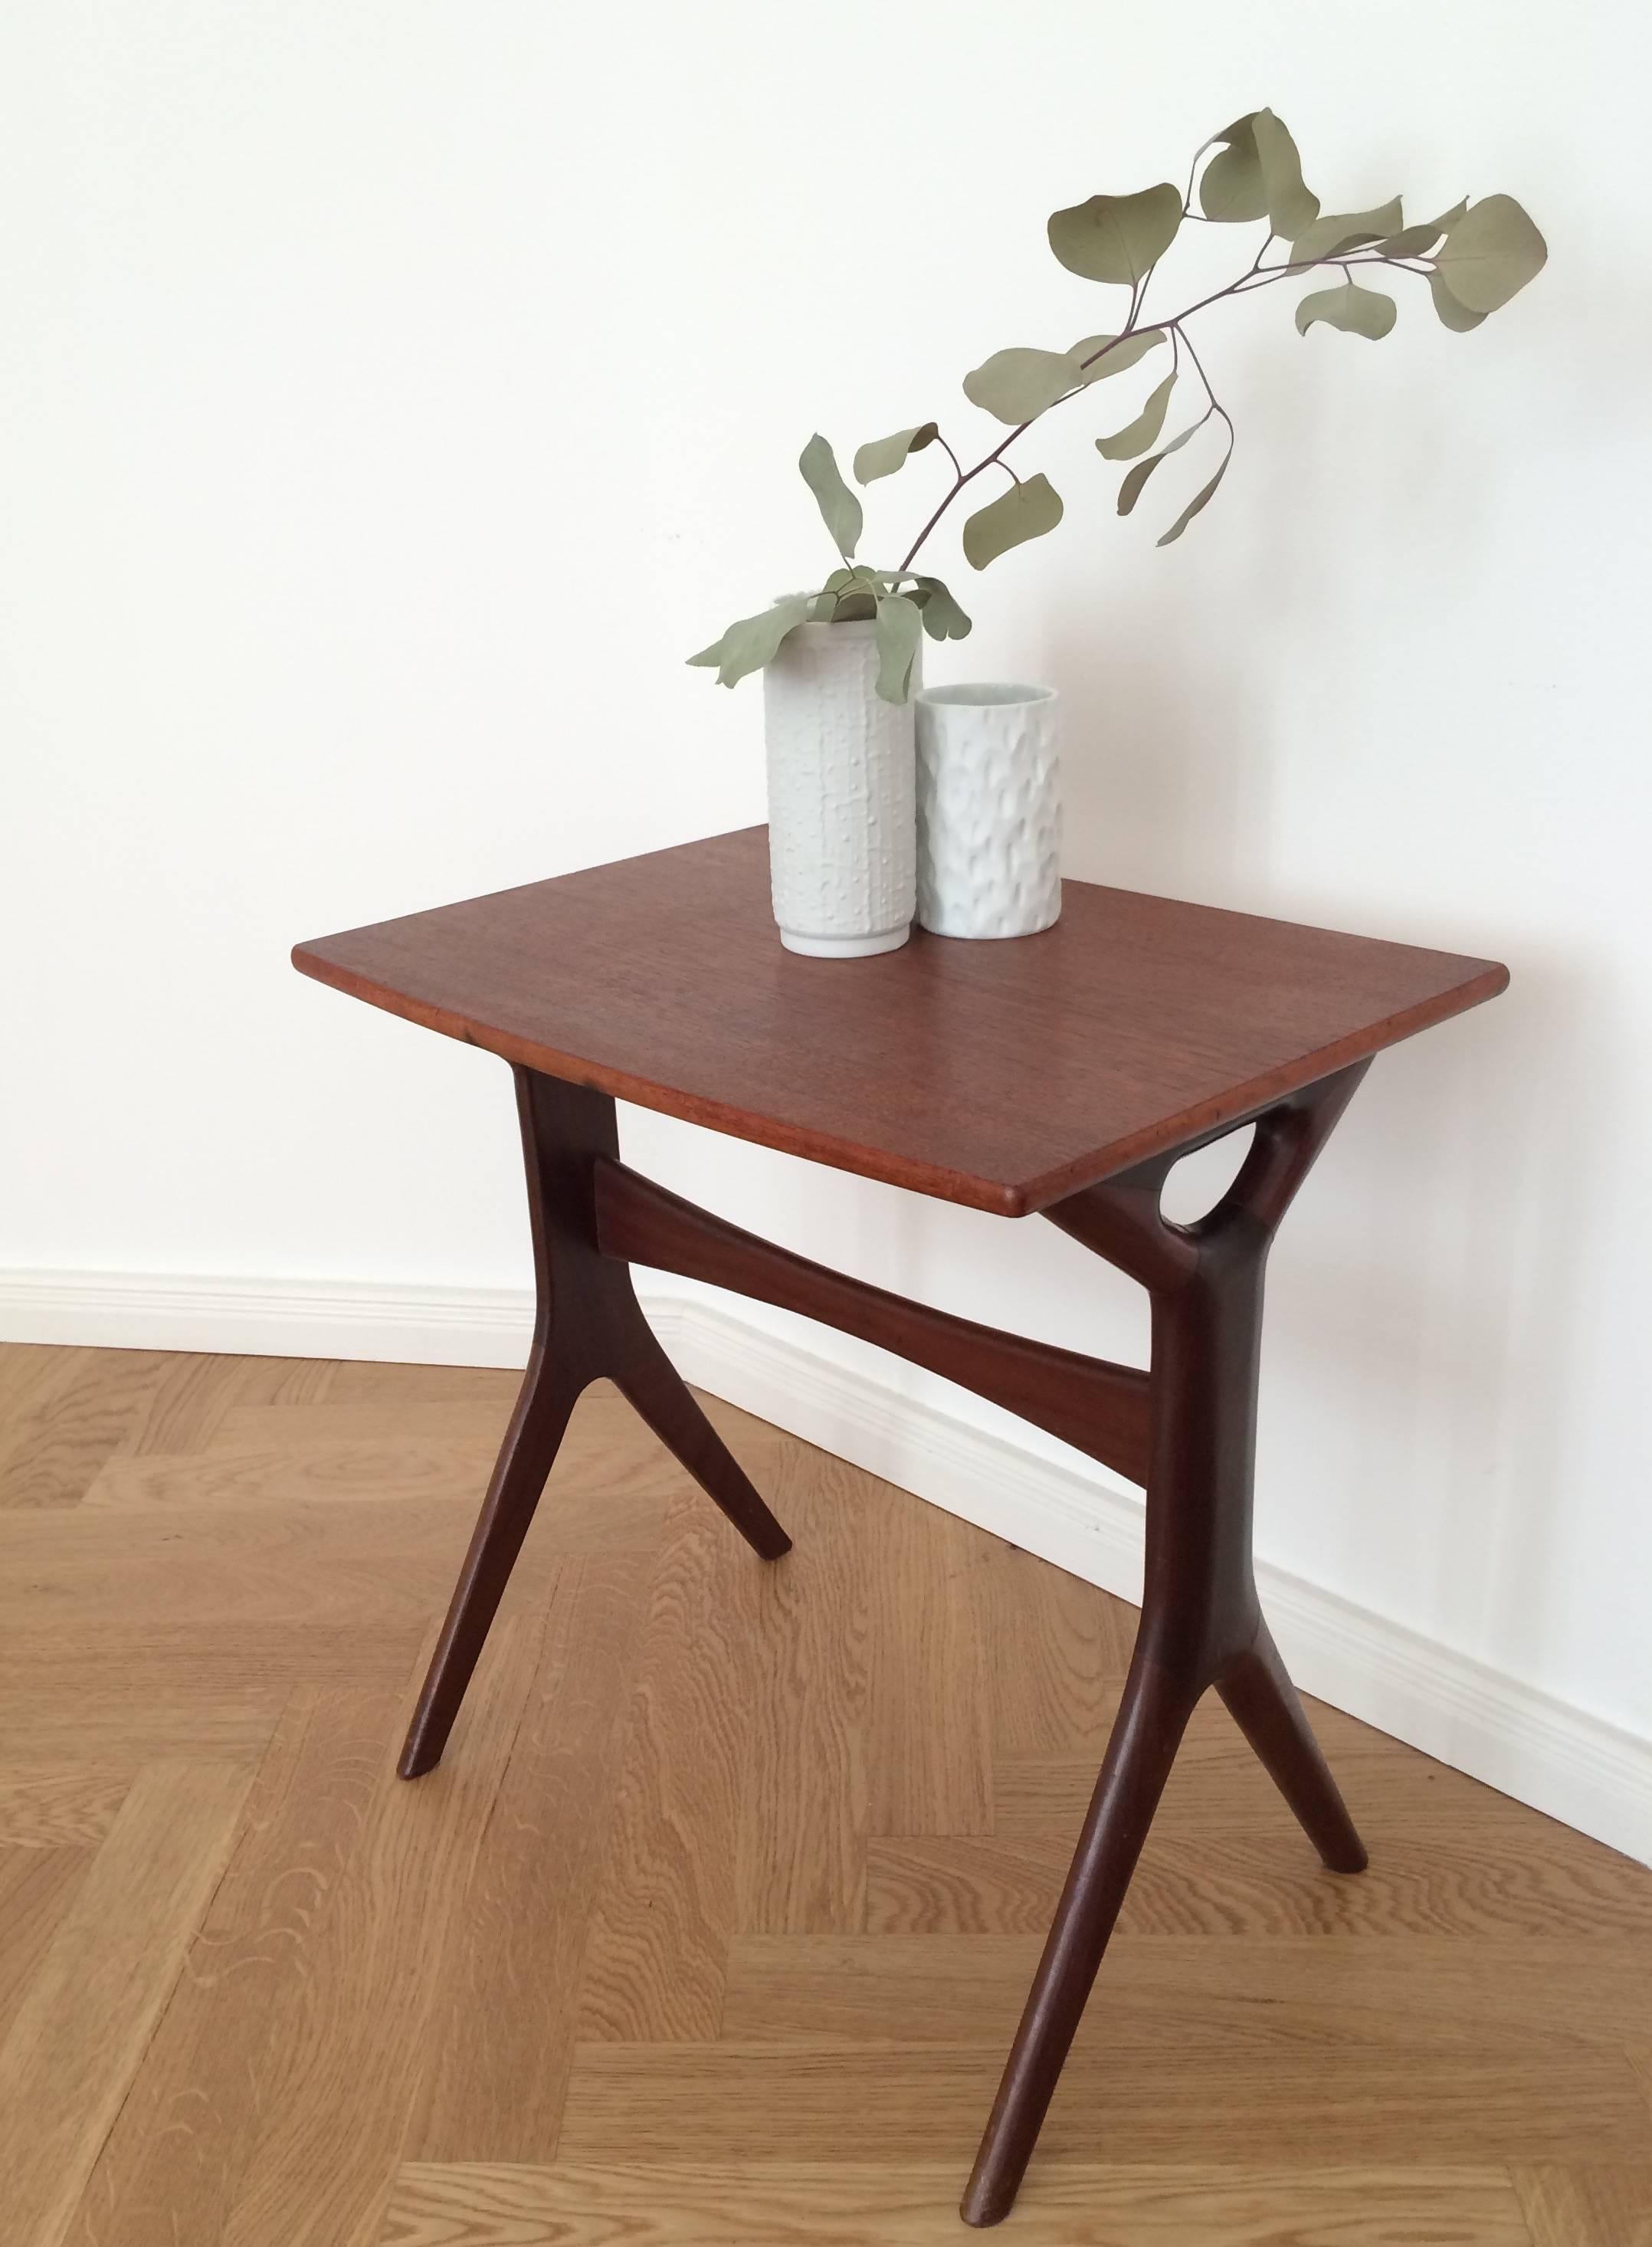 This side table was designed by the Danish designer Johannes Andersen and manufactured in Denmark by CFC Silkeborg. It consists of a rosewood veneered top and solid rosewood legs. The side table features slanted edges and cylindrical legs. Comes in